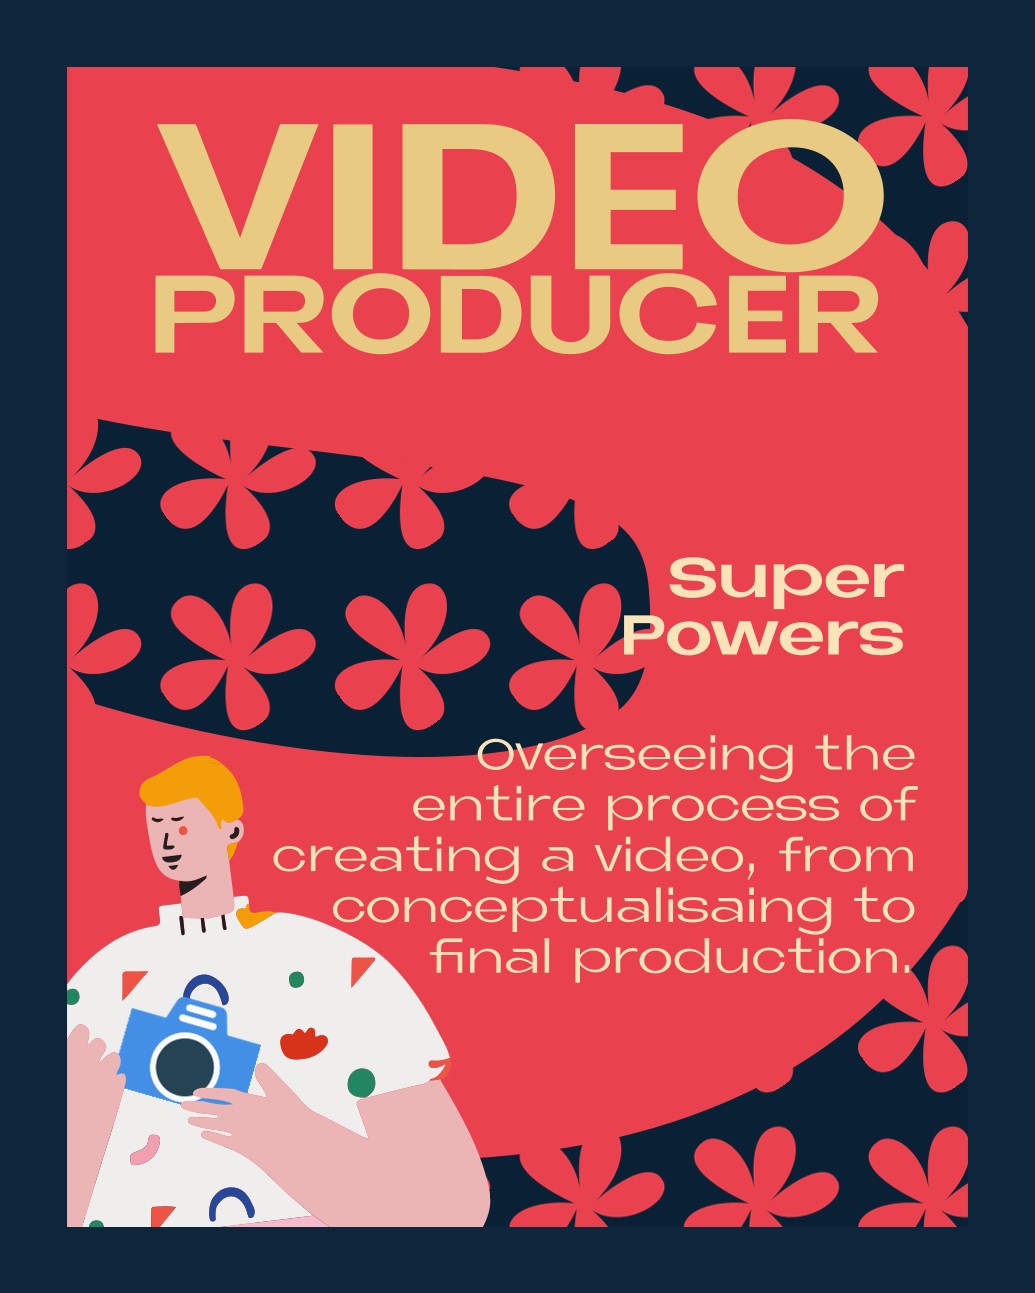 VIDEO PRODUCER – Super Powers: Overseeing the entire process of creating a video, from conceptualising to final production
